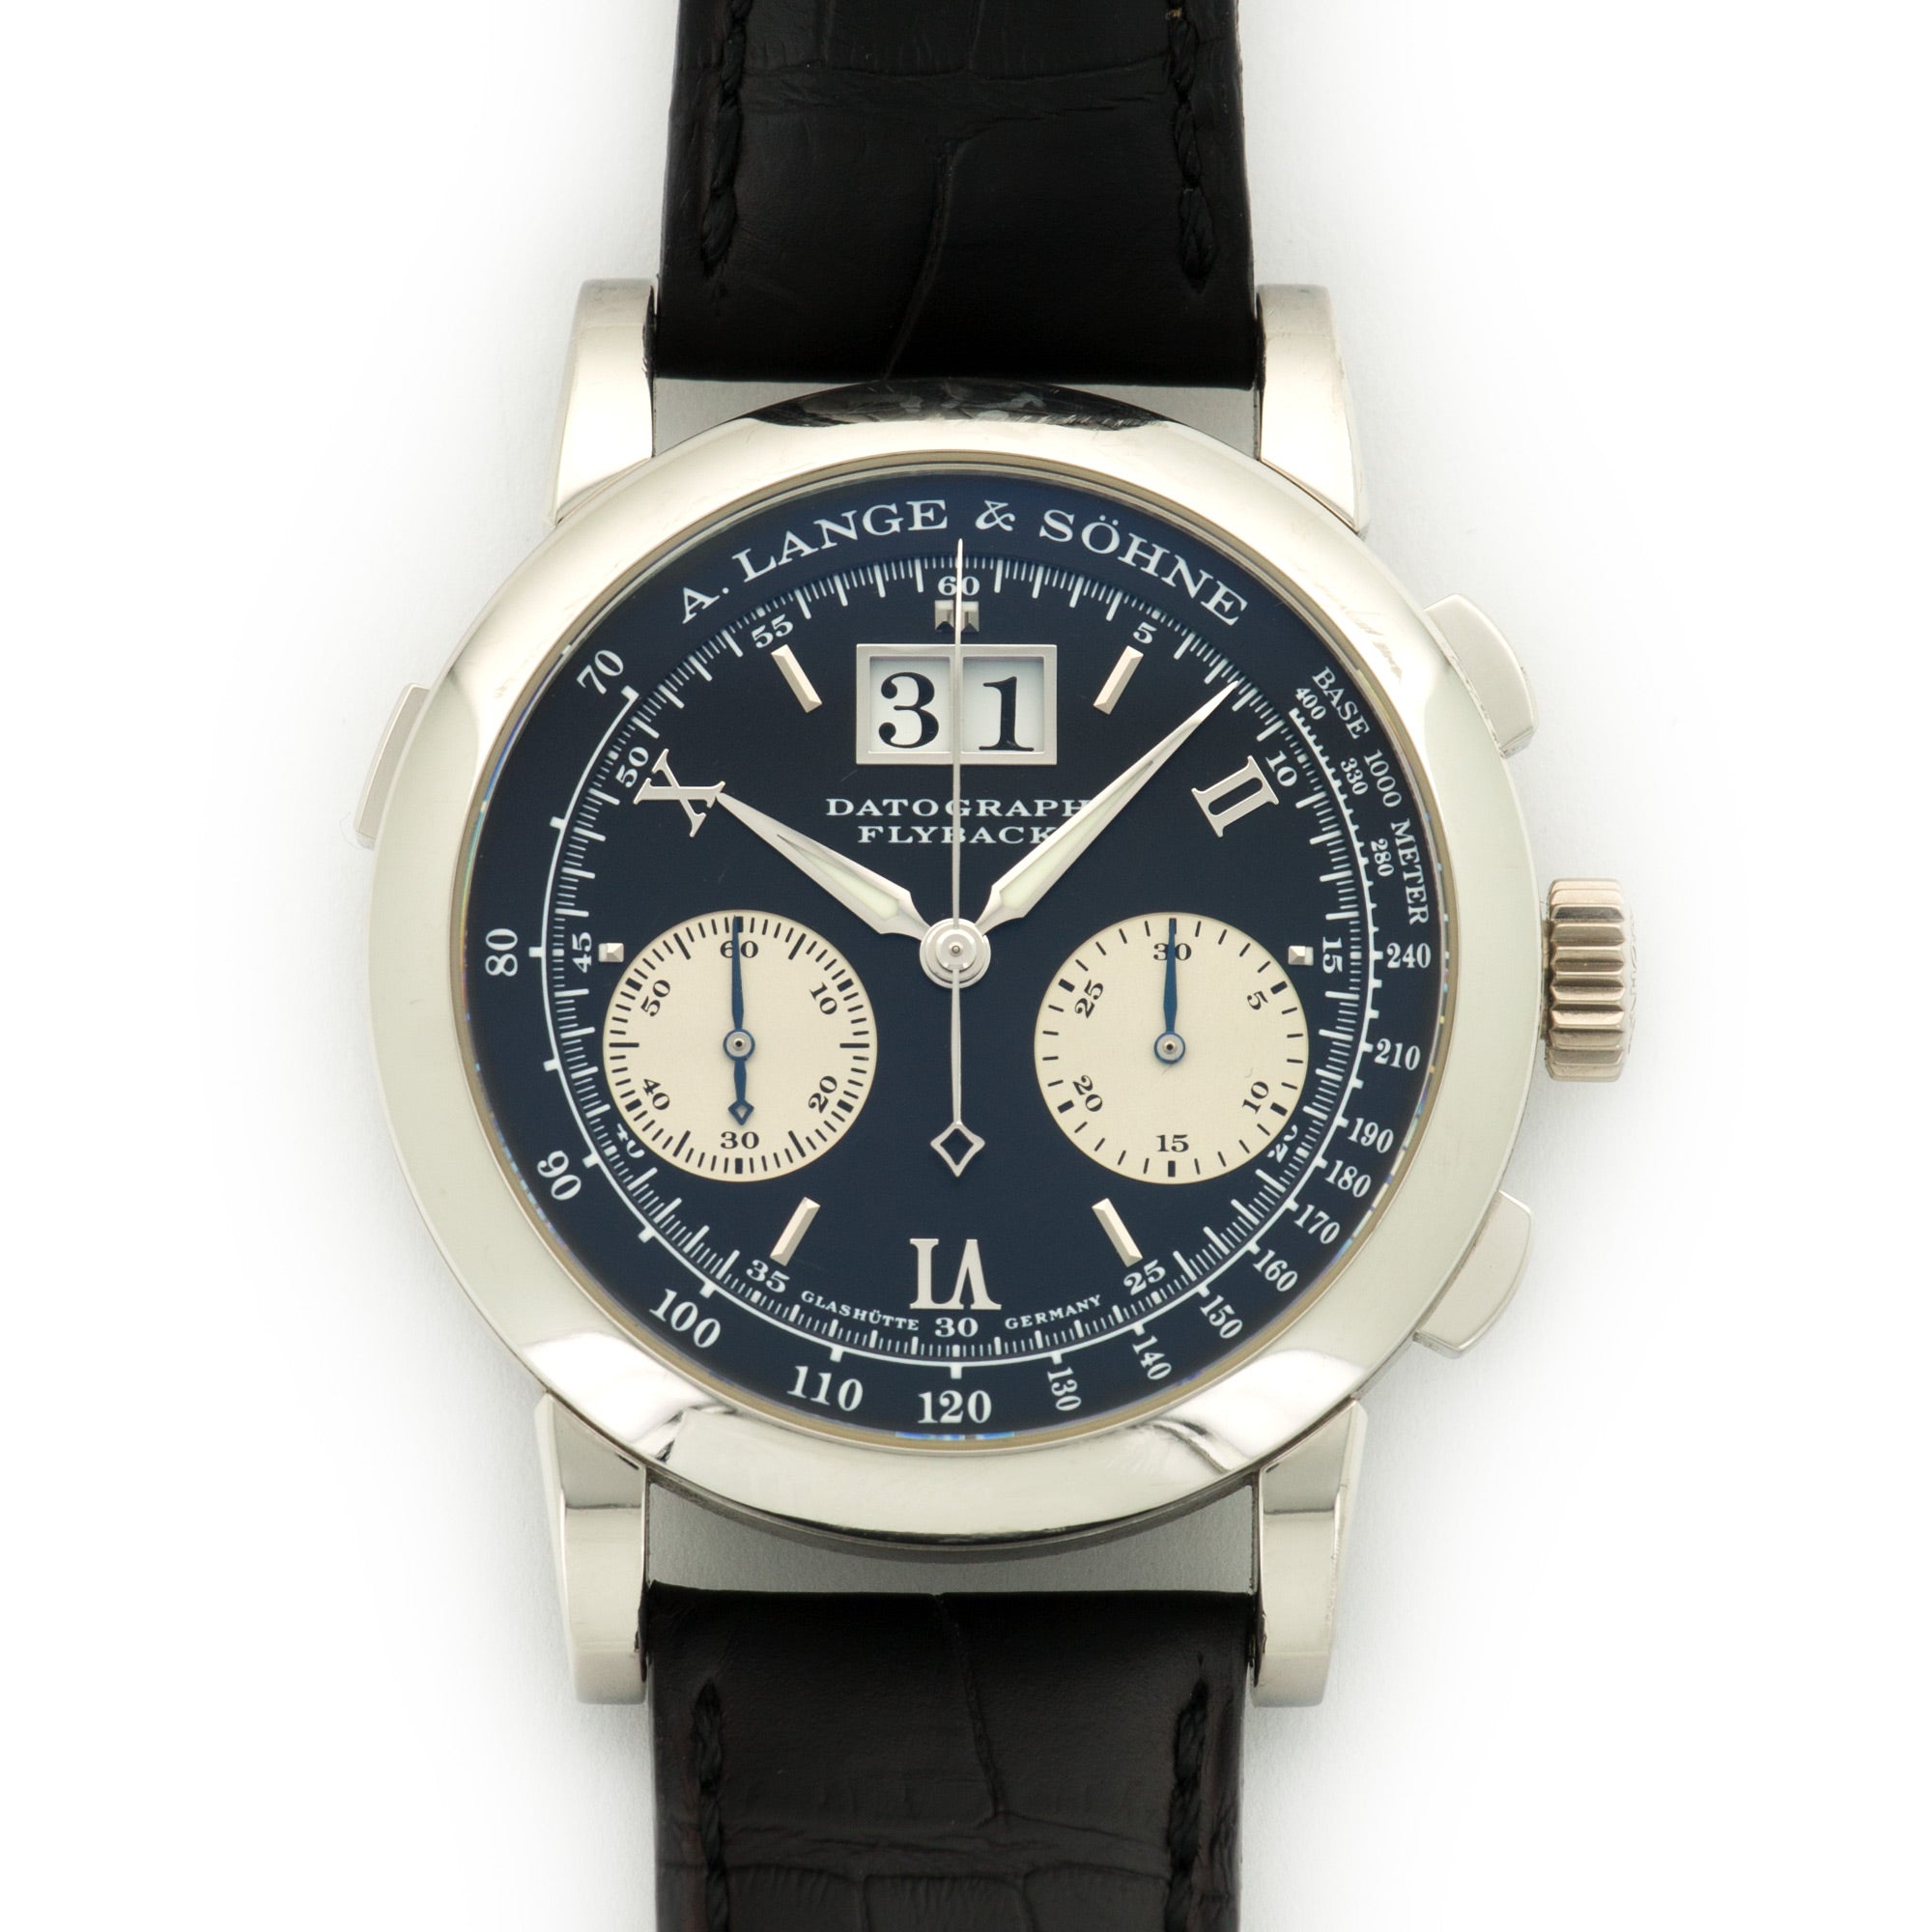 A. Lange & Sohne - A. Lange & Sohne Platinum Datograph Watch Ref. 403.035 - The Keystone Watches